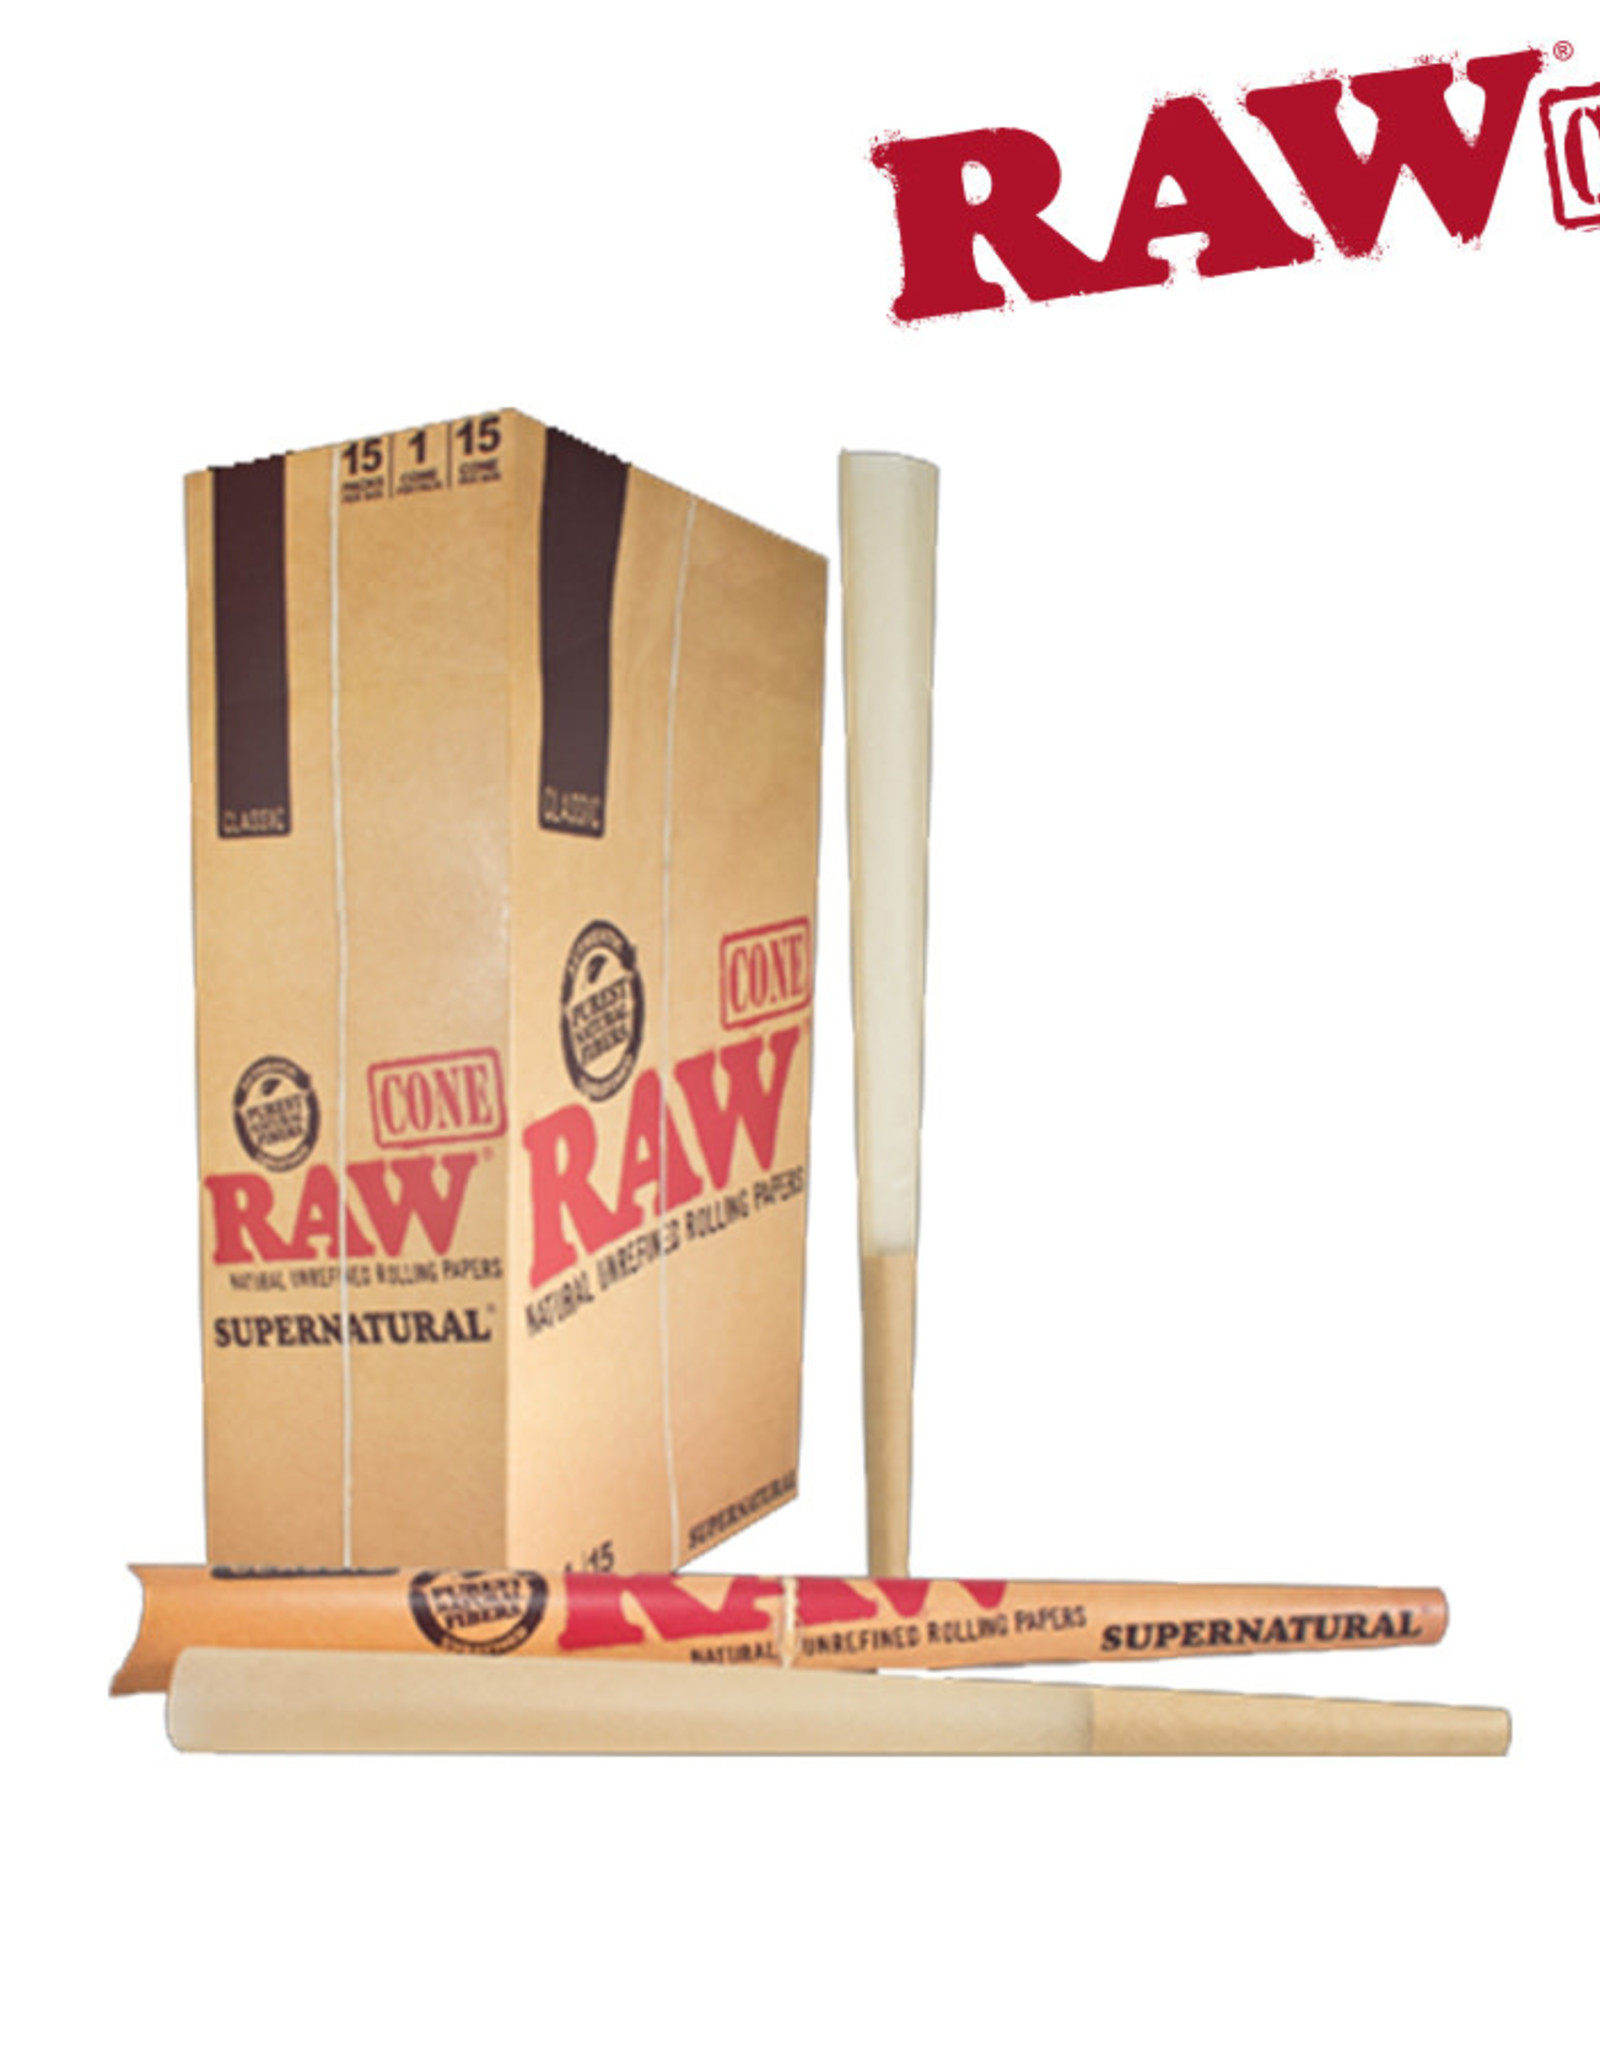 RAW RAW 12" Supernatural Pre-Rolled Cone